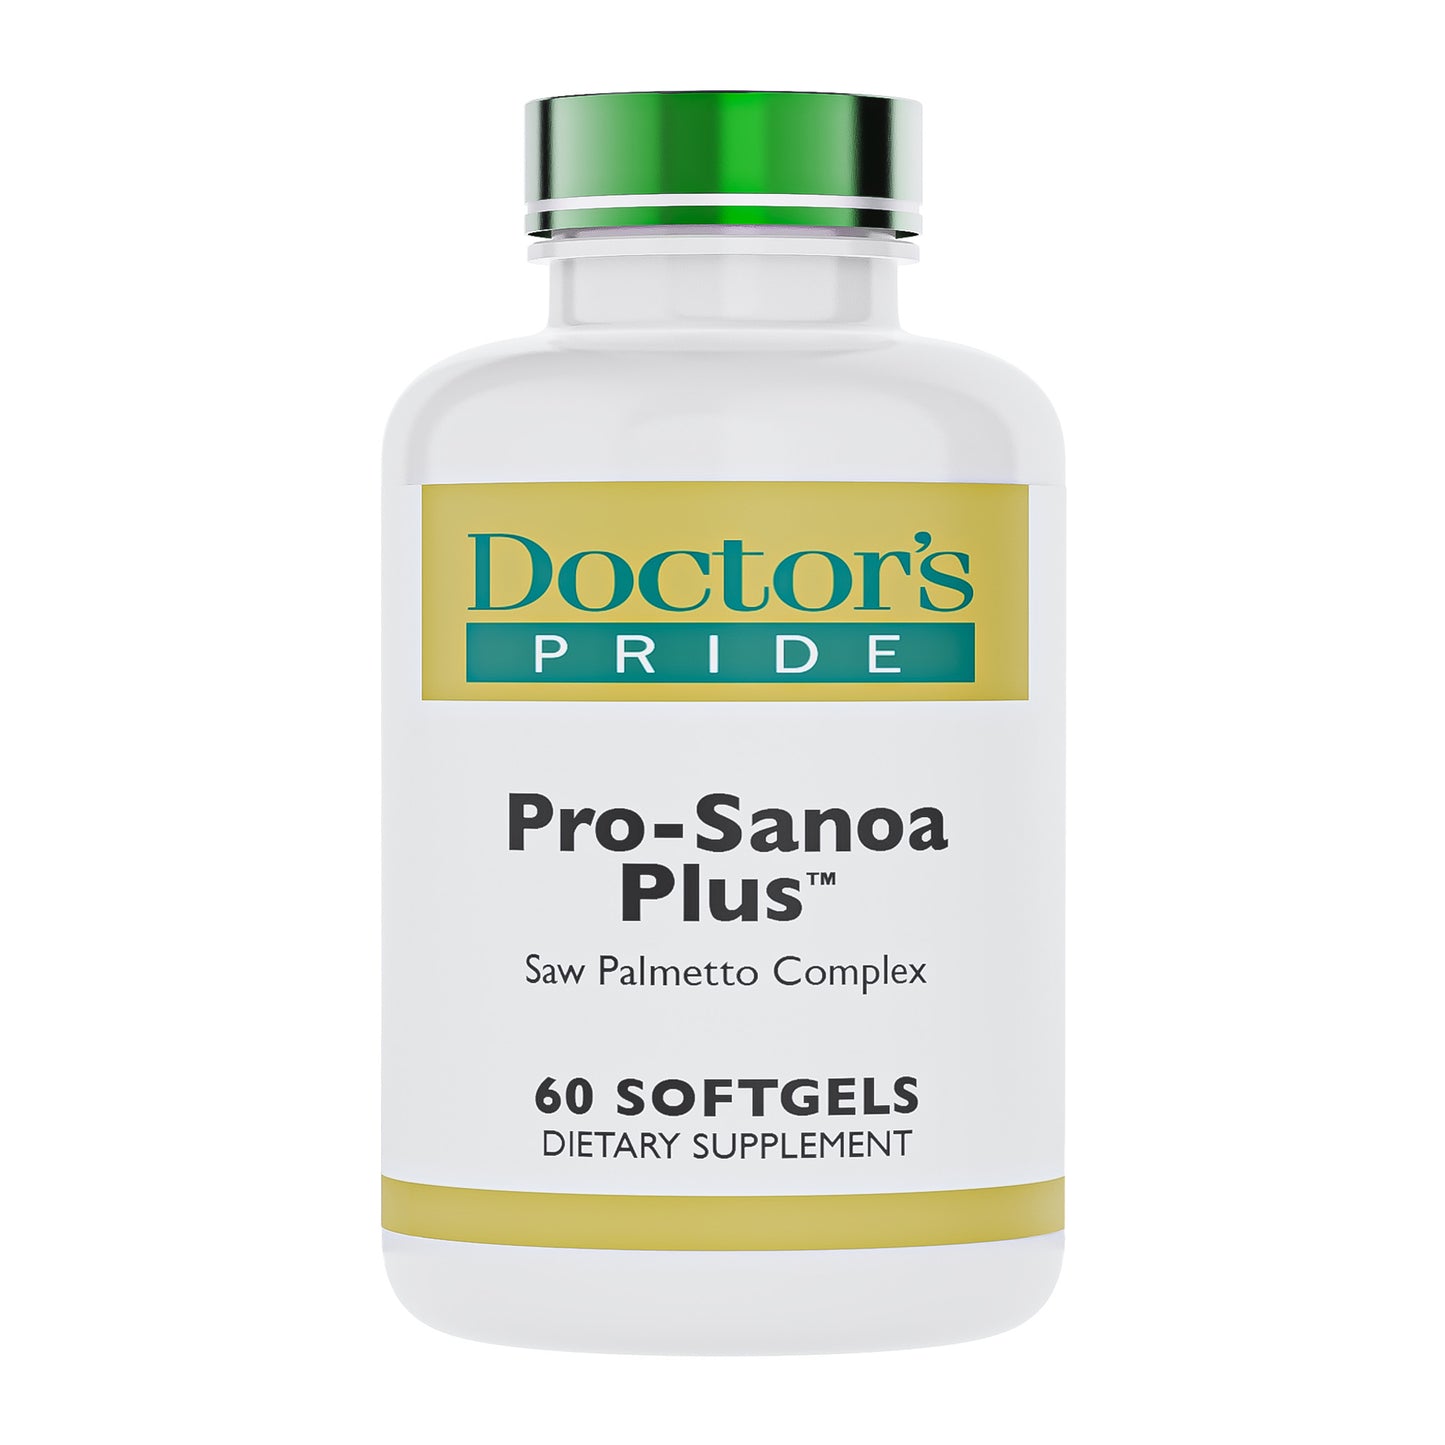 Pro-Sanoa: Saw Palmetto with Pygeum, Pumpkin Seed Oil, & More - 60 Softgels